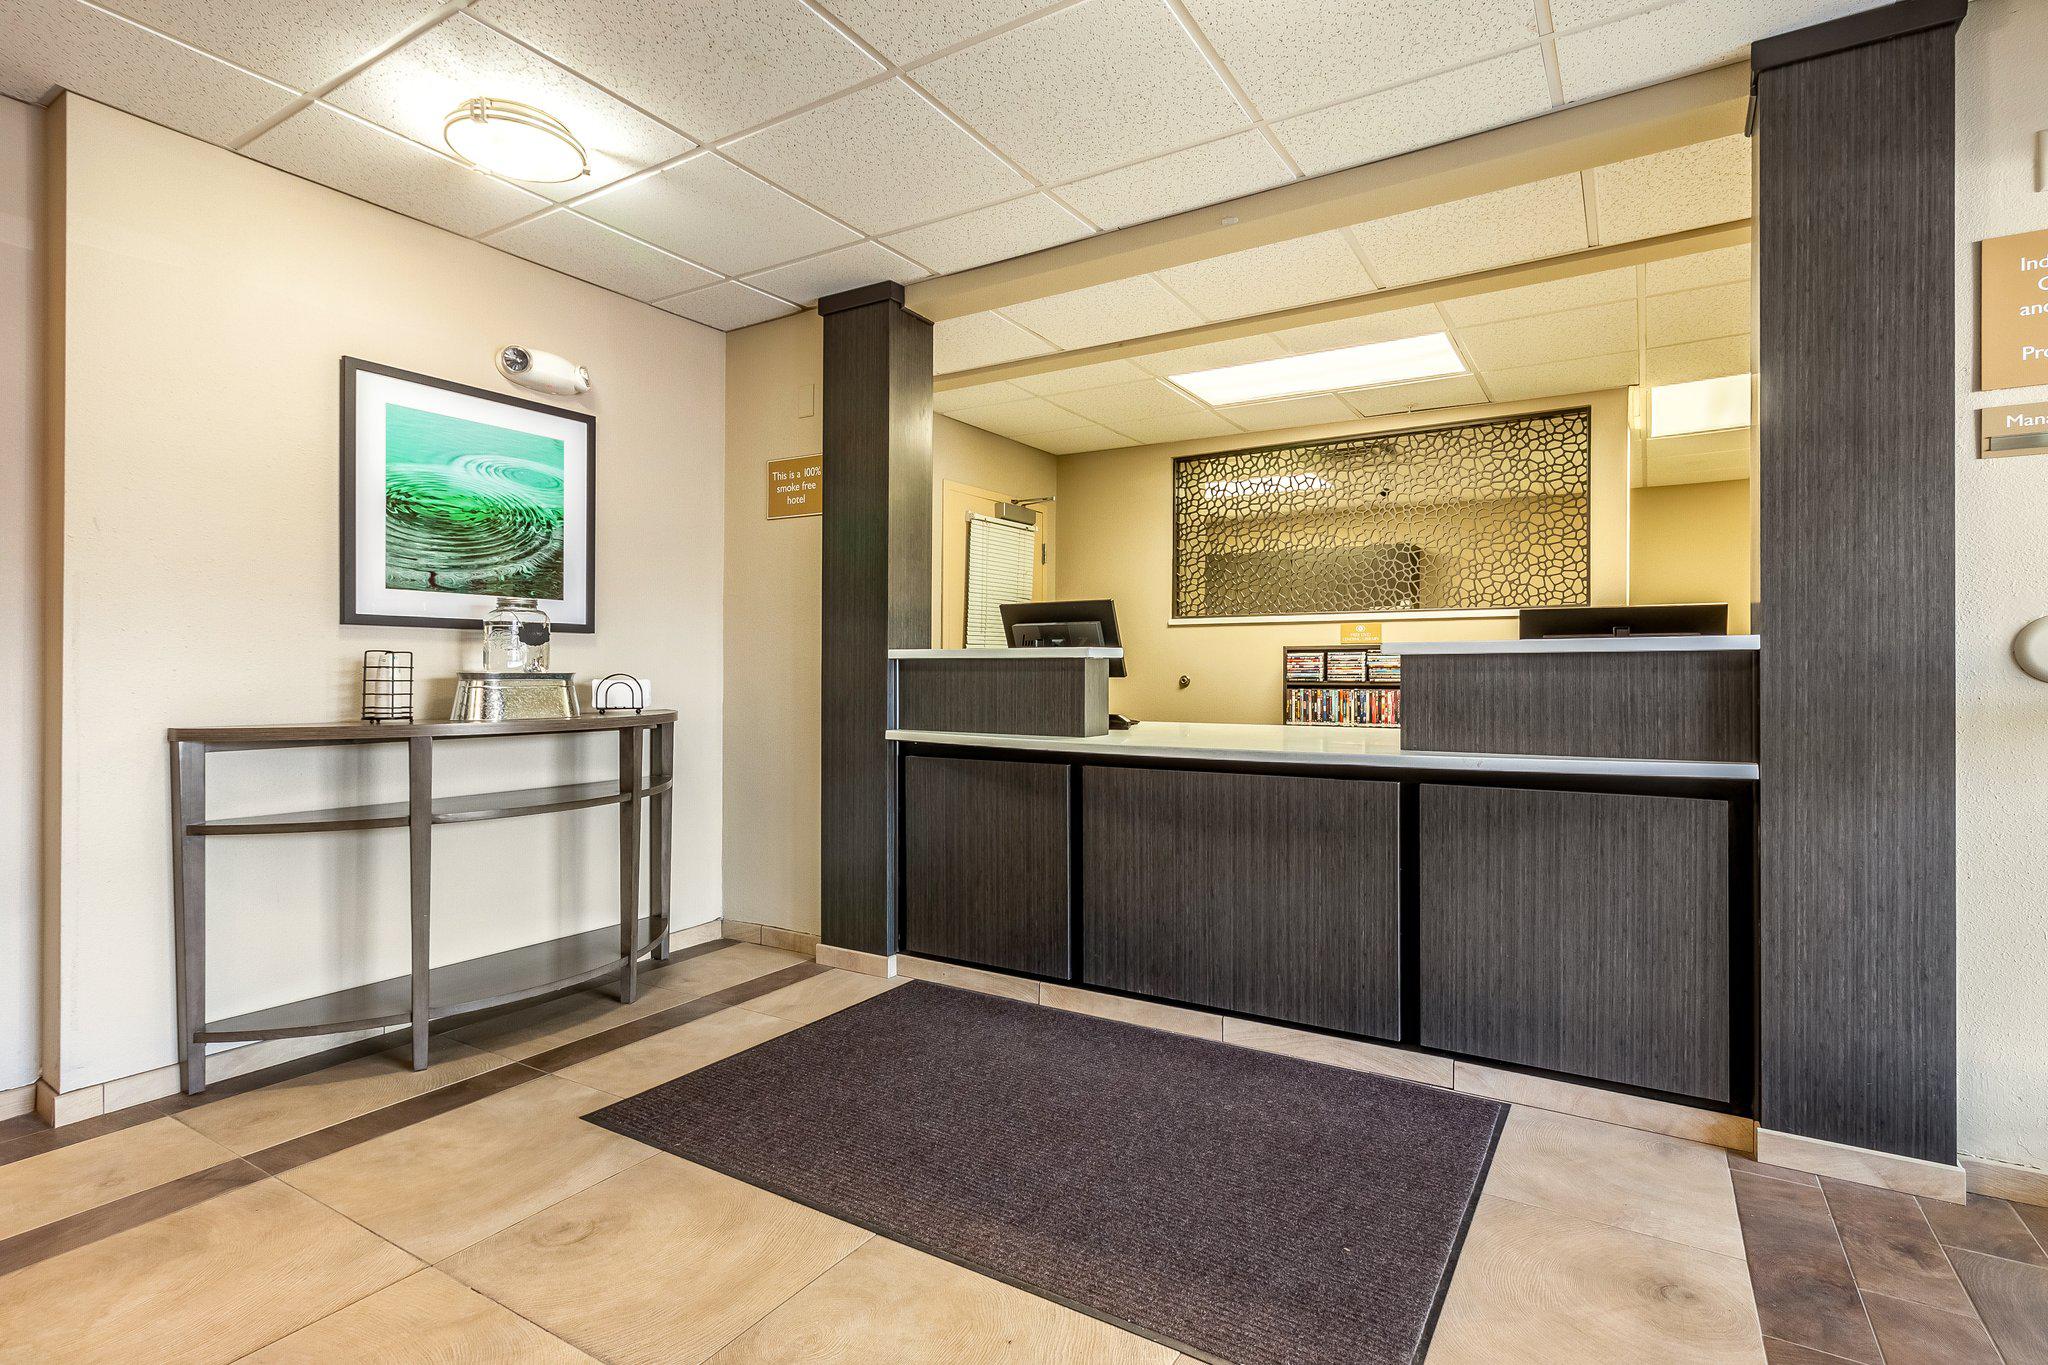 Candlewood Suites Lincoln Photo